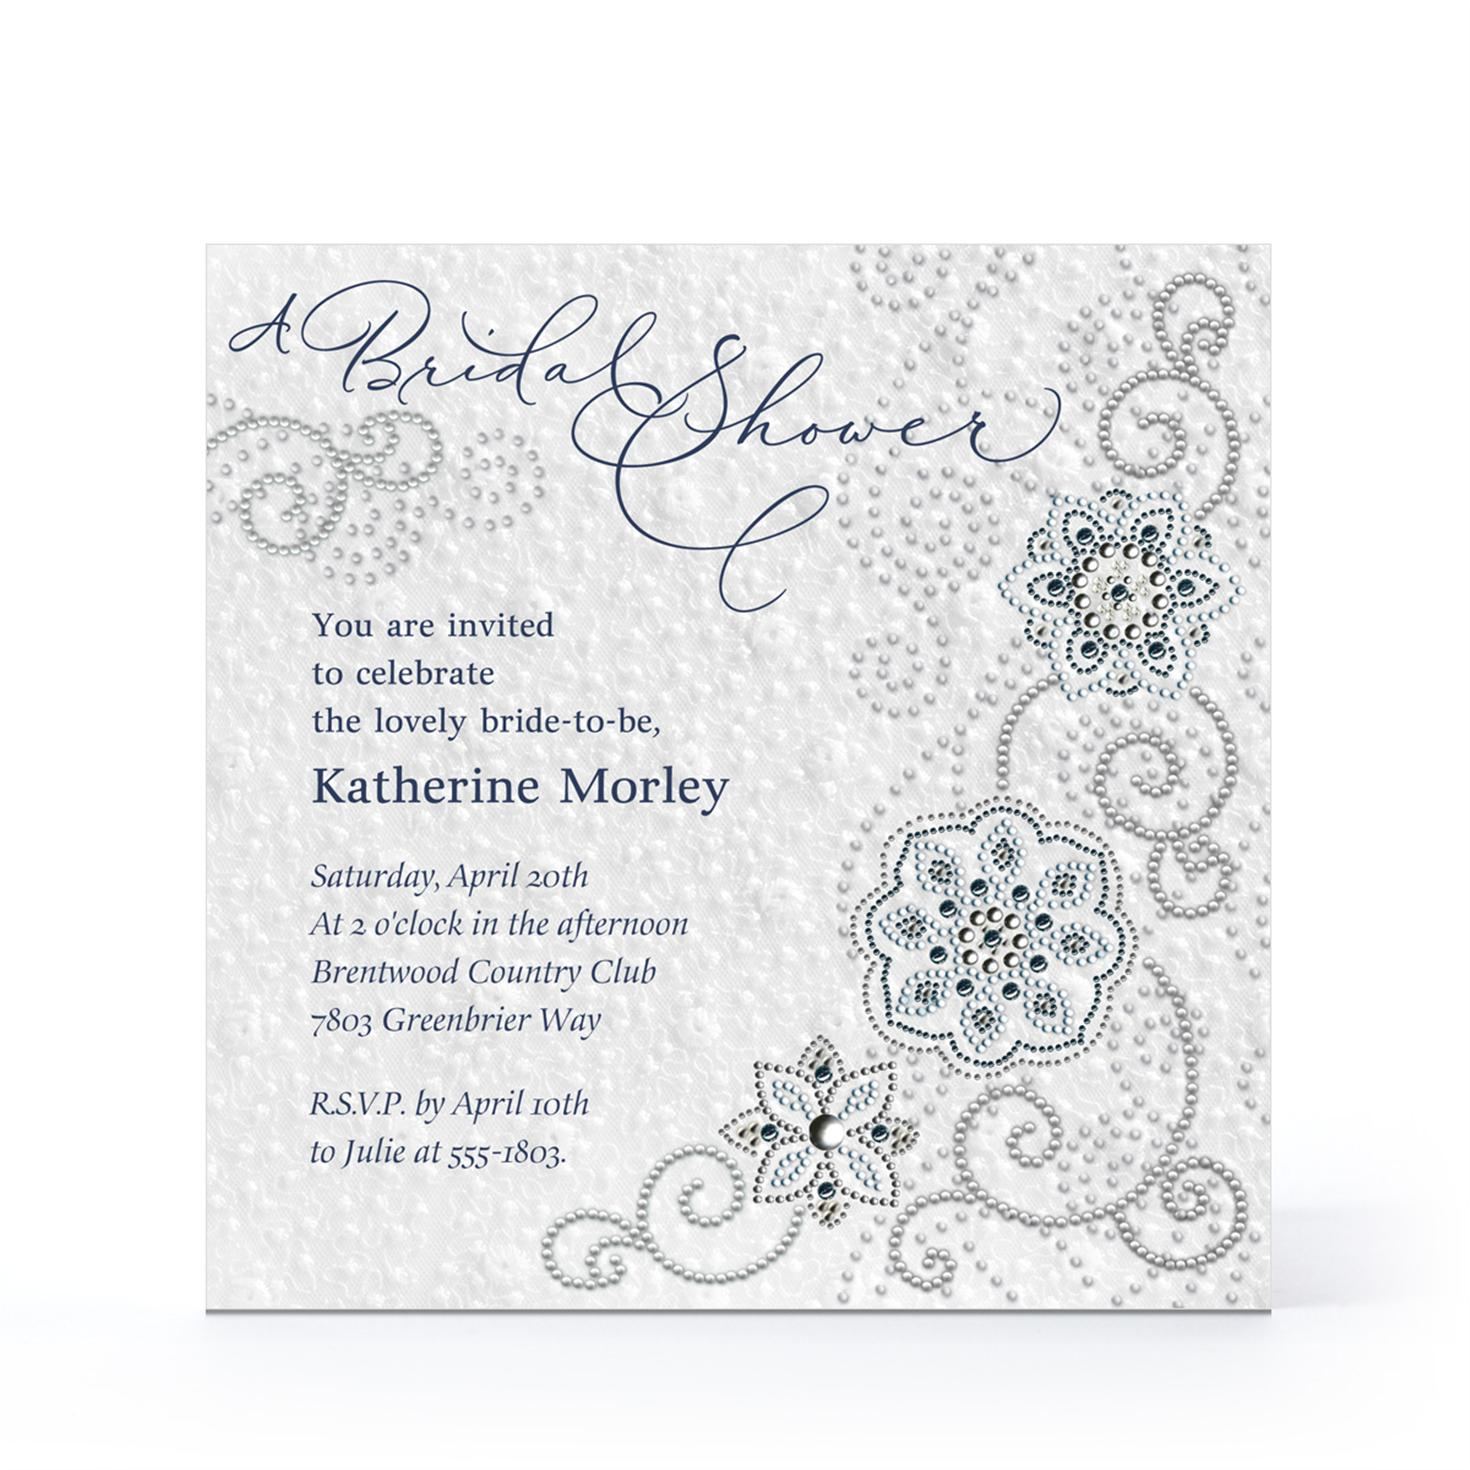 Hallmark Wedding Invitations From Kinderhooktap Have Unique In with regard to dimensions 1470 X 1470